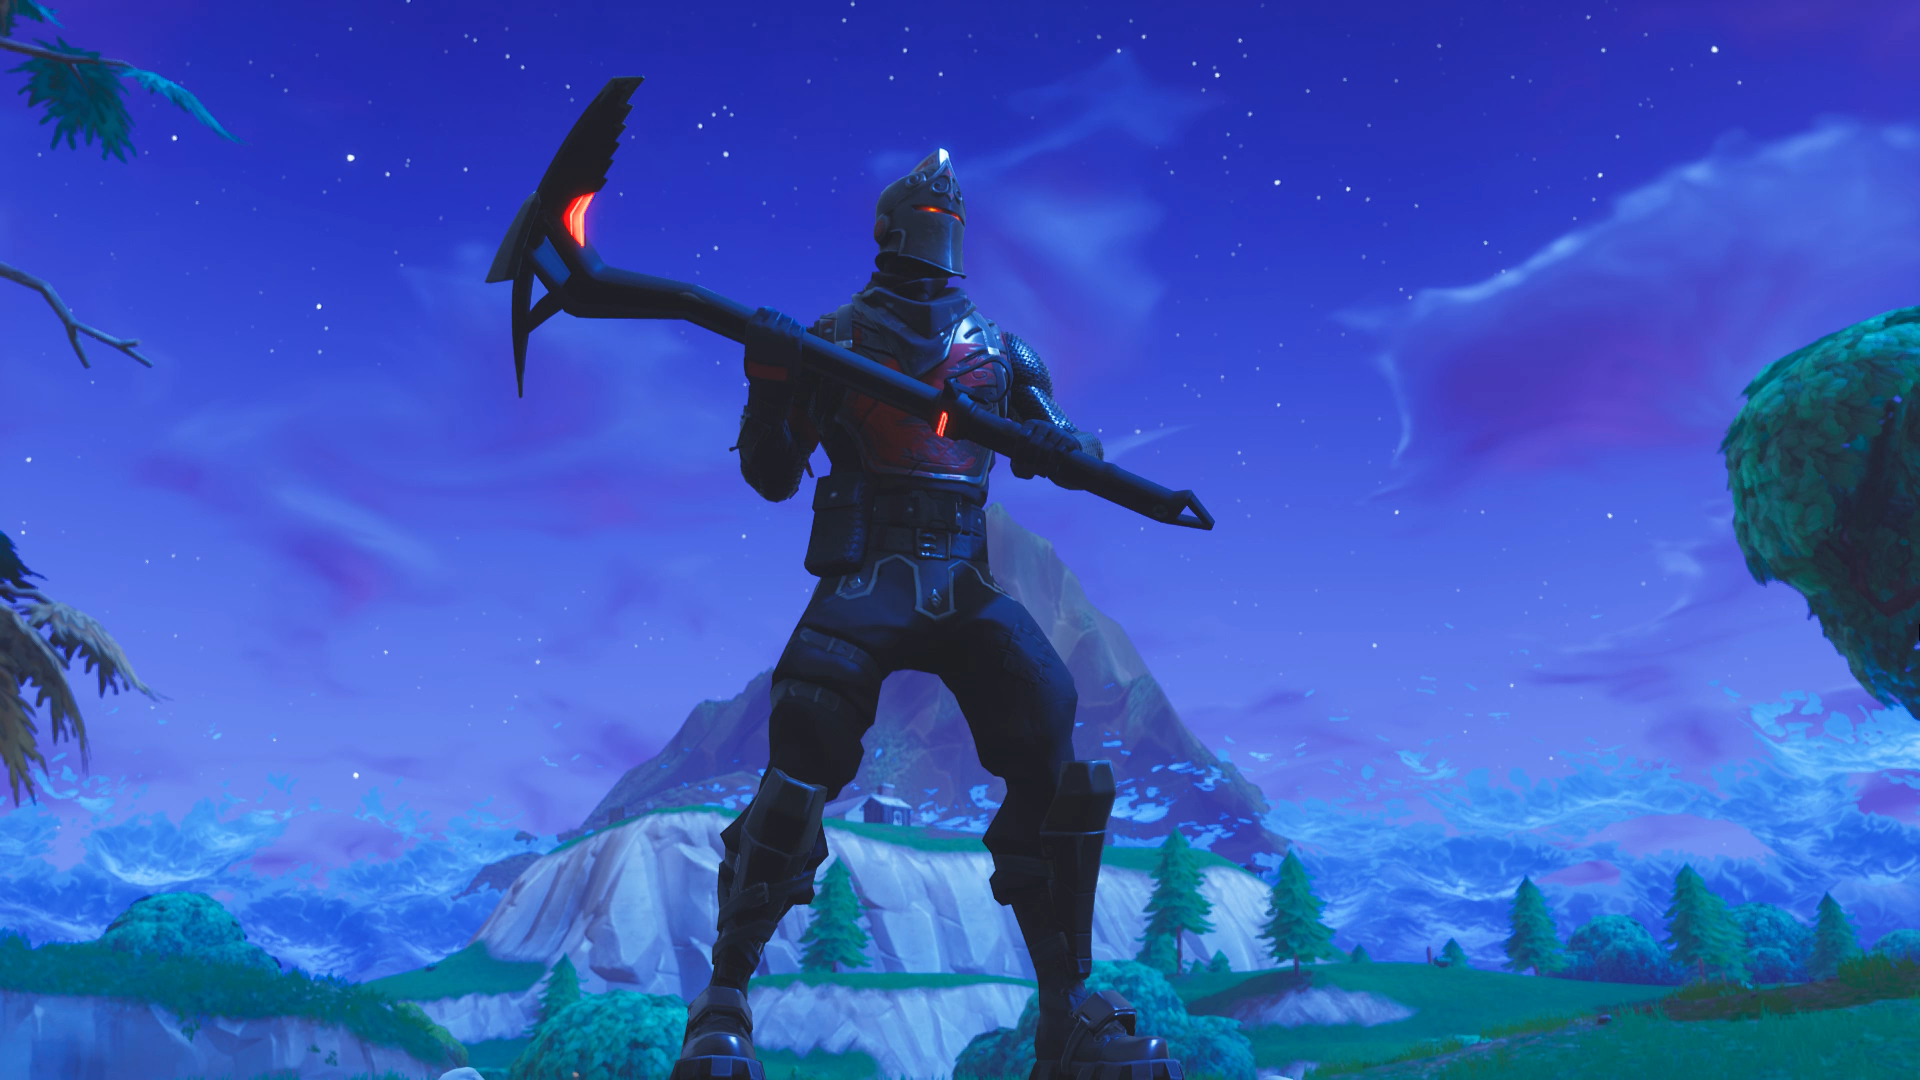 How To Complete Fortnite Reboot Rally Quests And Unlock Free Rewards